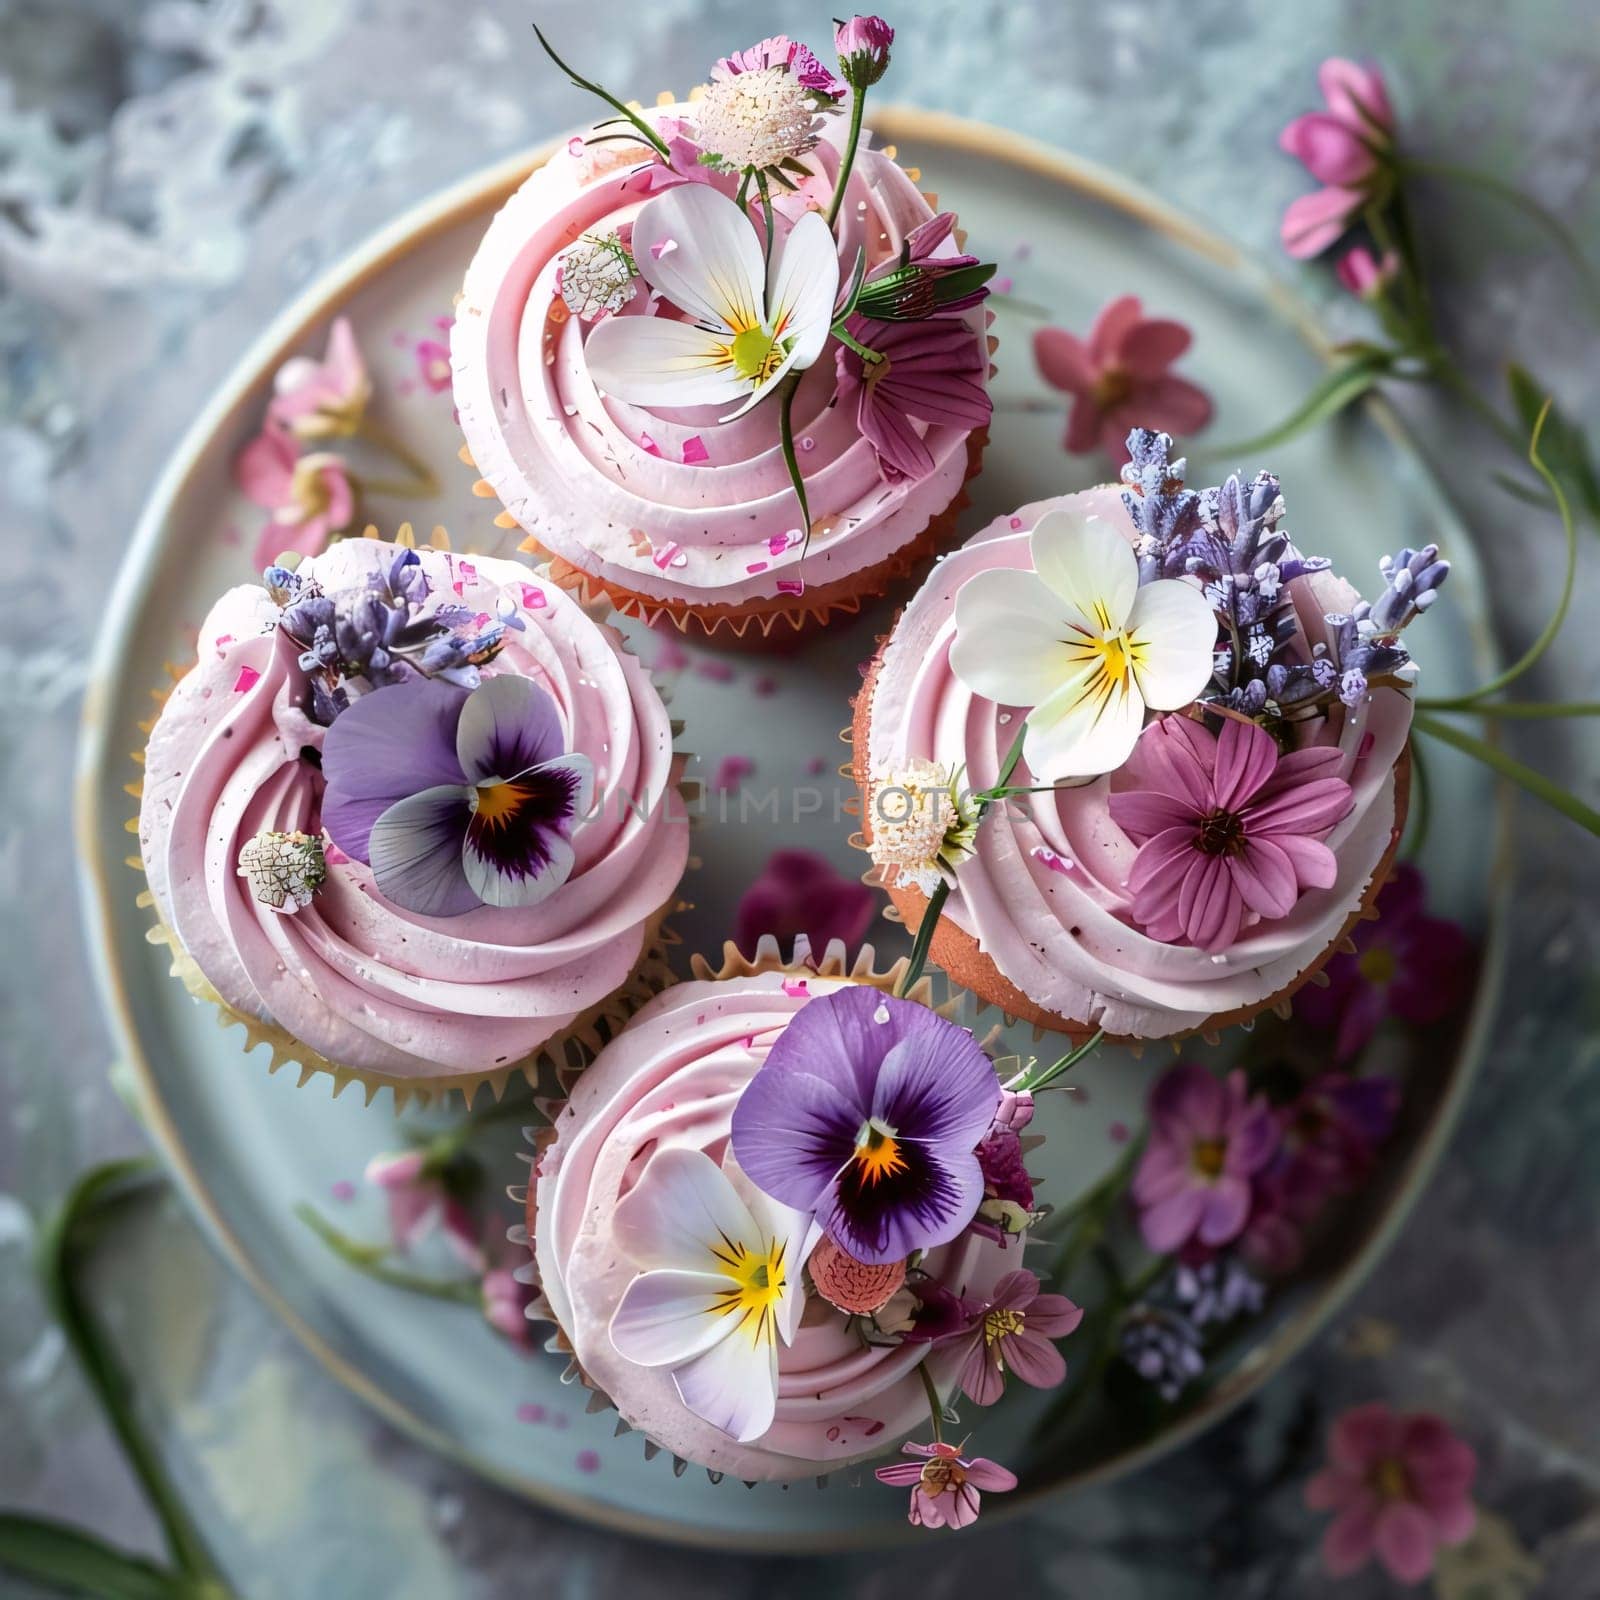 Small cupcakes with cream and pink flowers on a tray top view. Flowering flowers, a symbol of spring, new life. by ThemesS